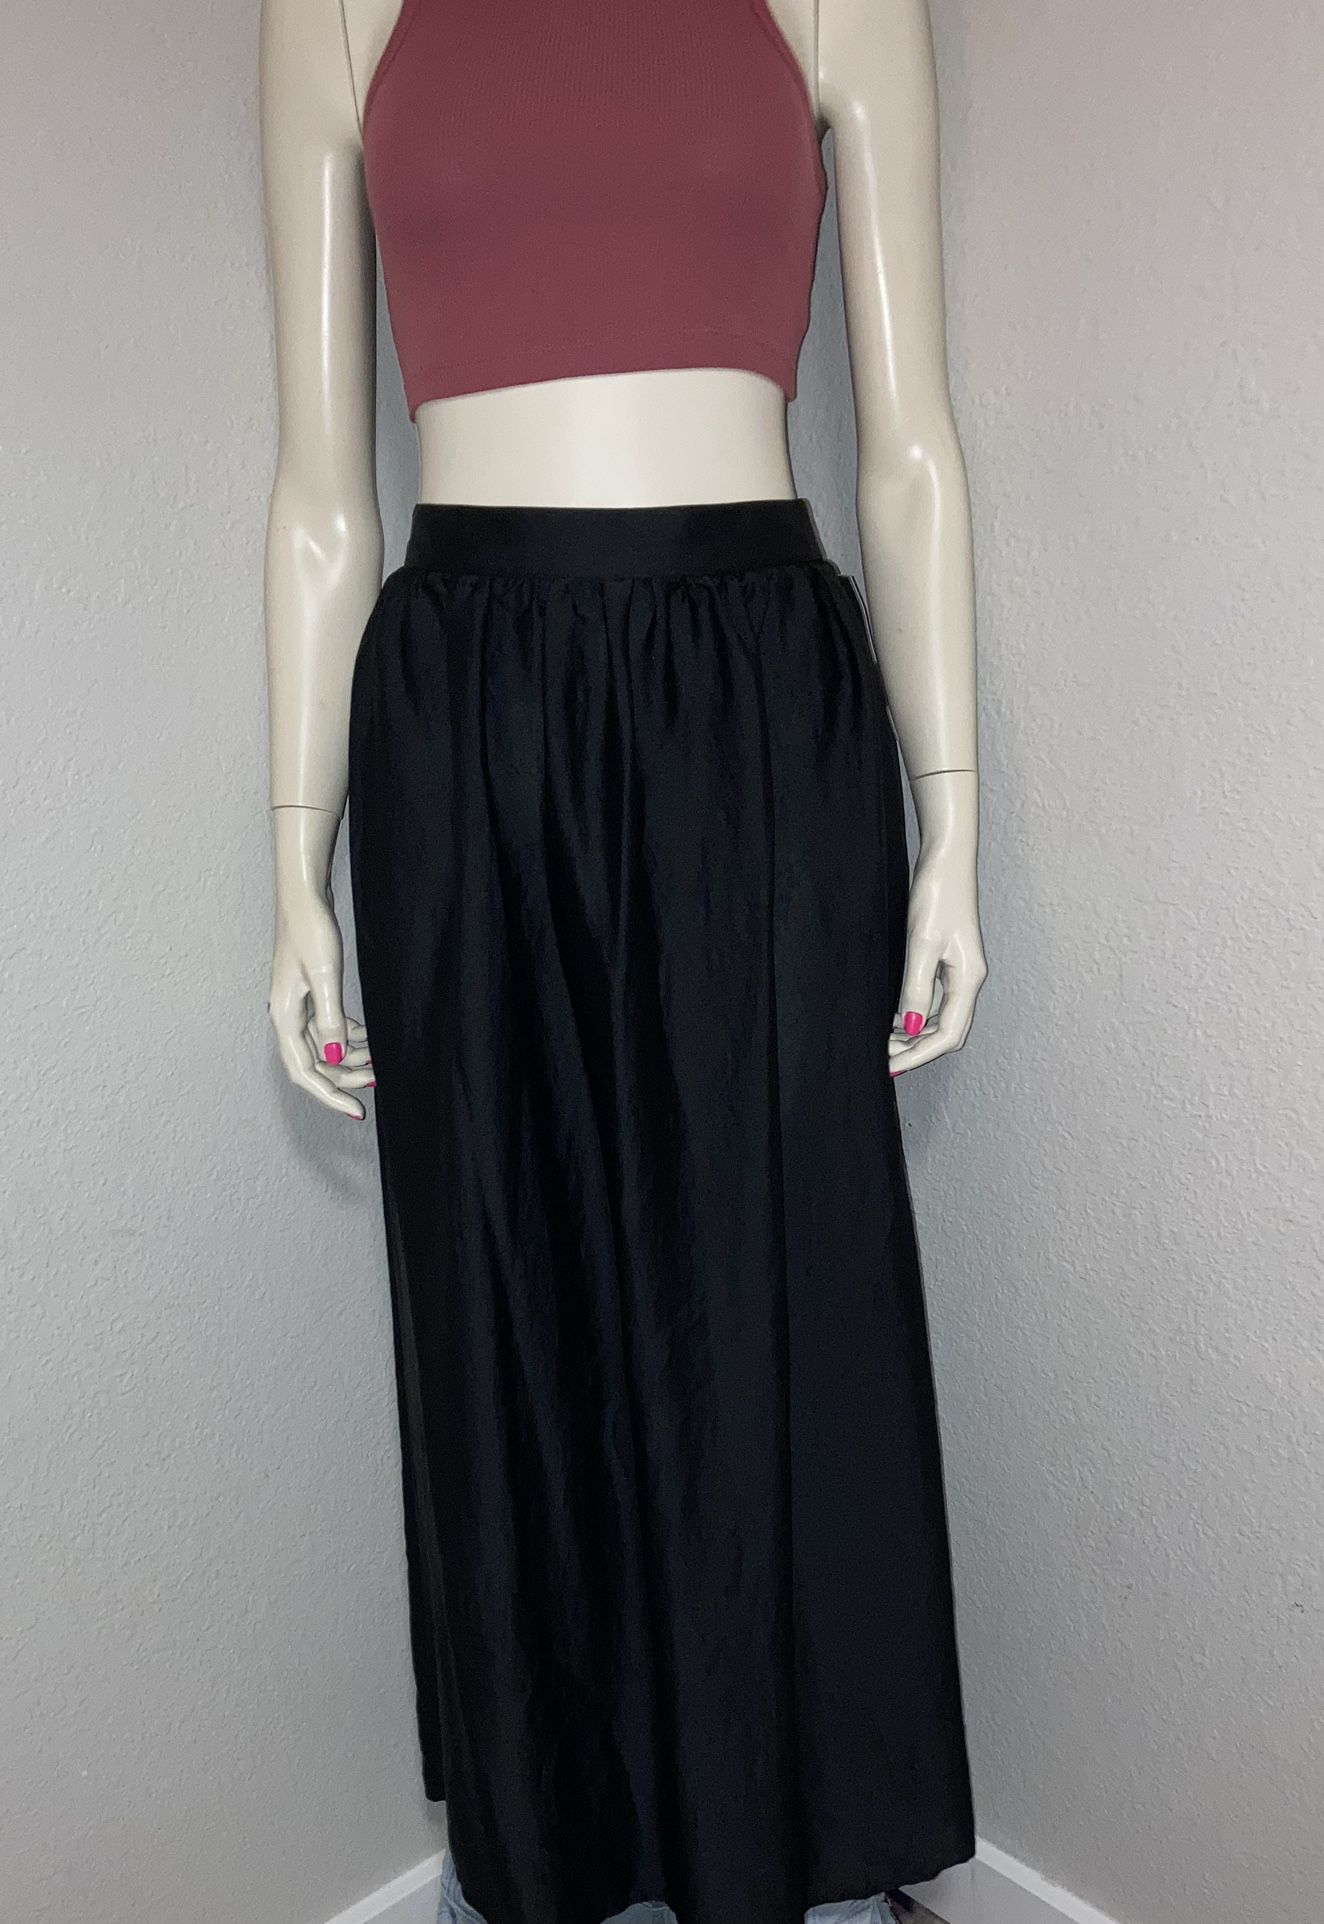 Mossimo Maxi Skirt Size S